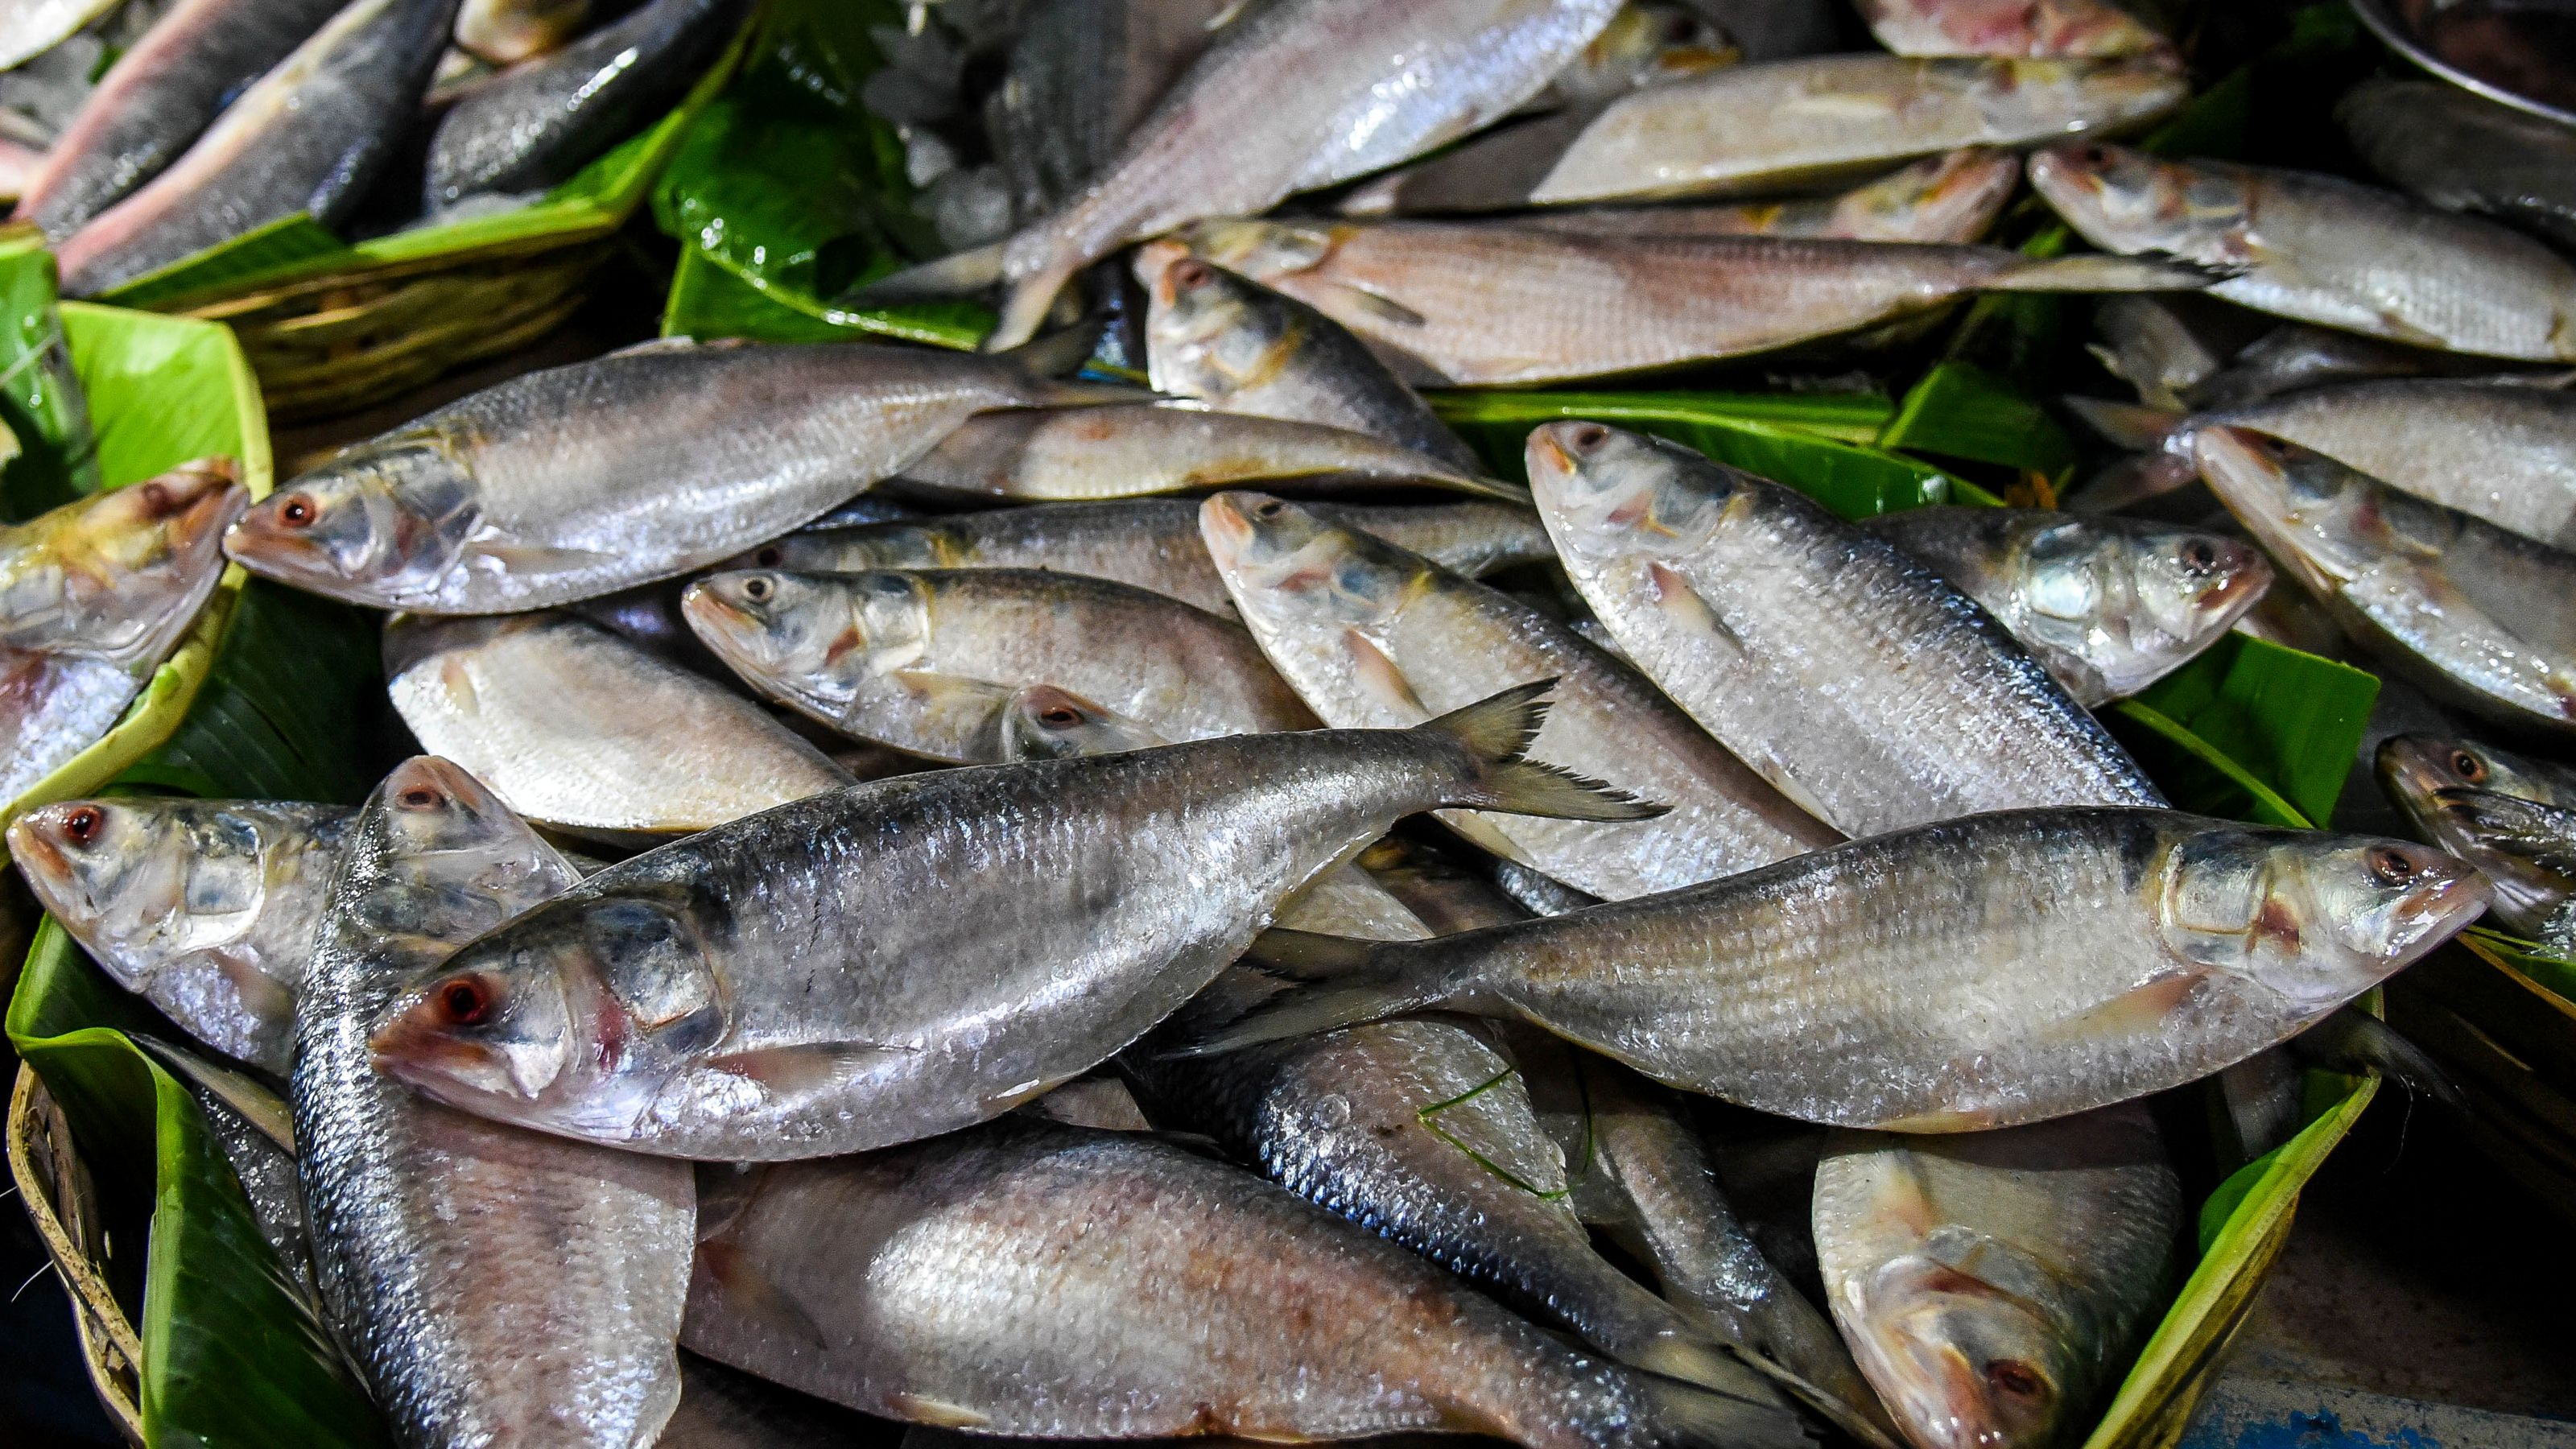 Distribute fishes with relief items: Fisheries ministry